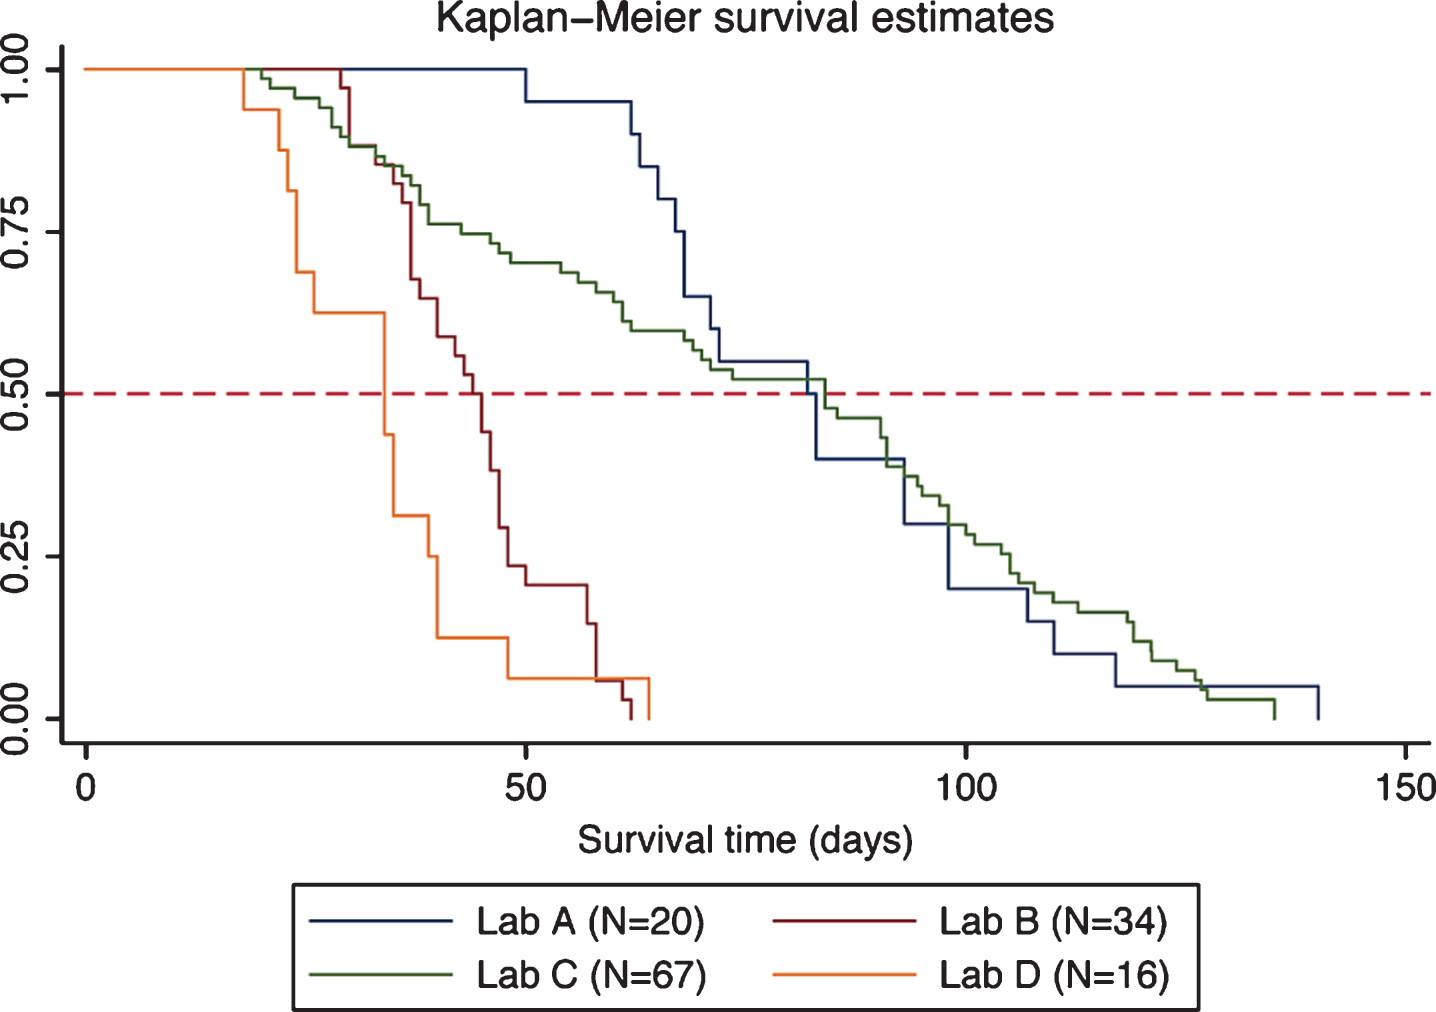 Kaplan-Meier plot of DyW survival by laboratory. Survival estimates are shown for each laboratory along with a reference line at 50% survival.